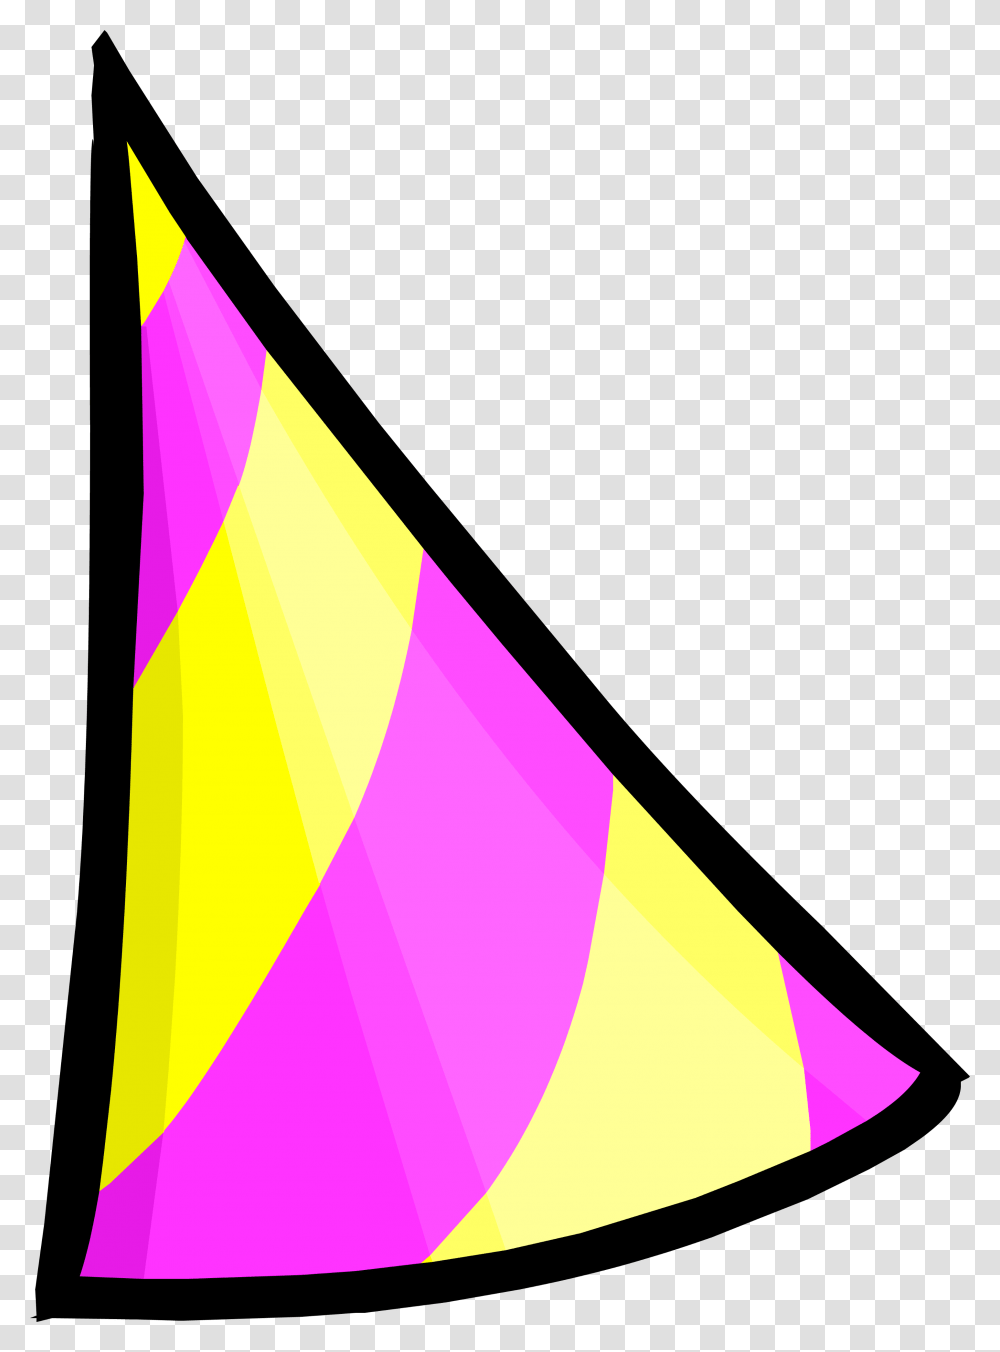 Party Hat Club Penguin Rewritten Beta Hat, Clothing, Apparel, Triangle, Cone Transparent Png